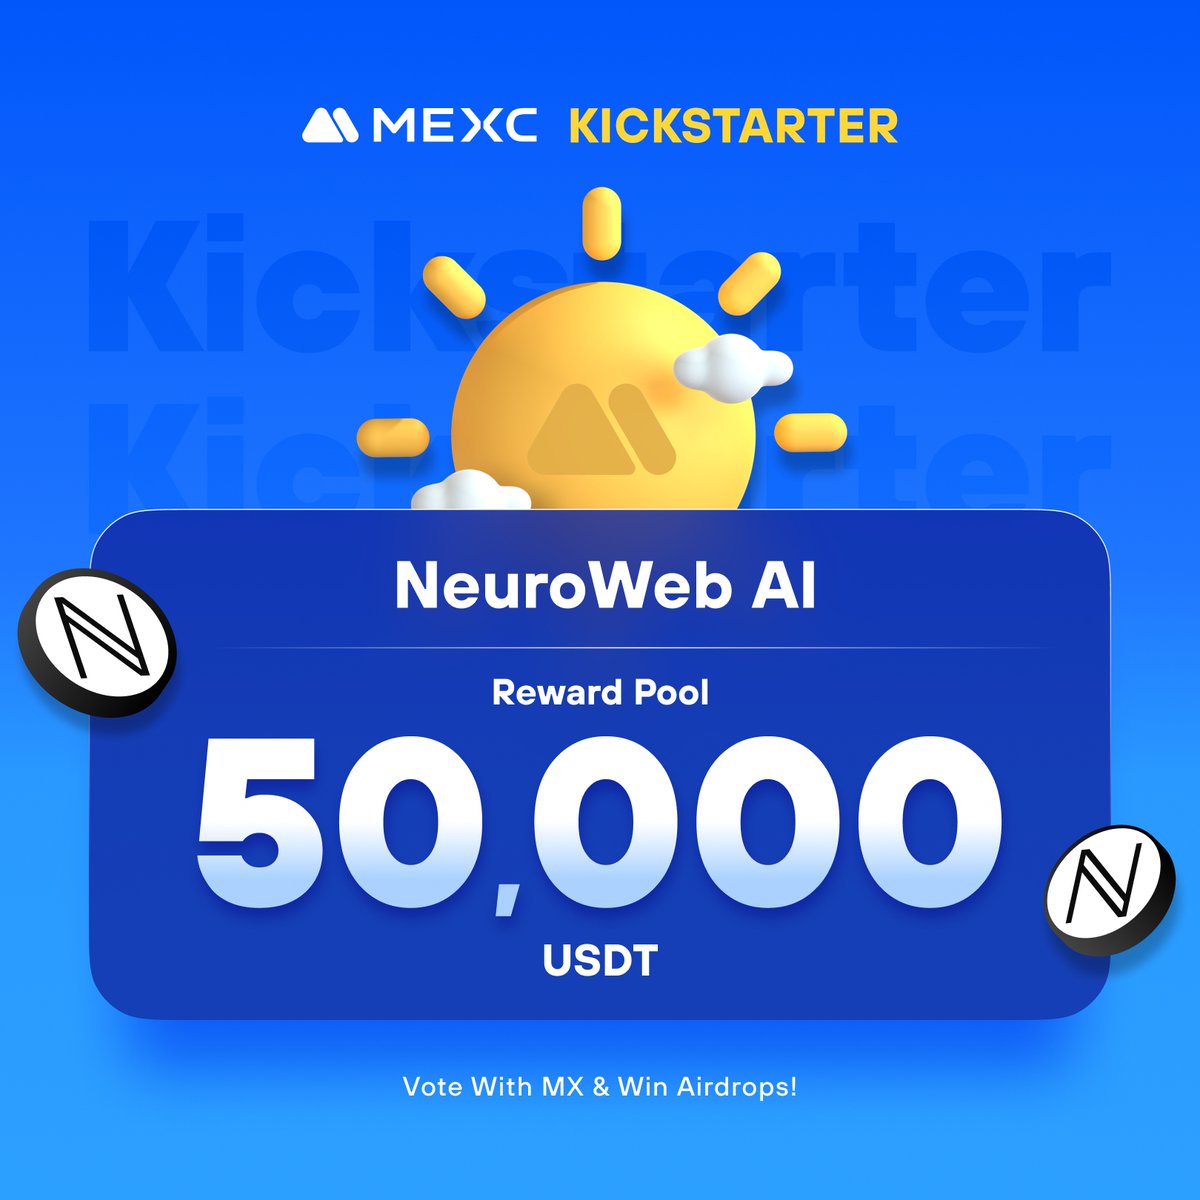 .@NeuroWebAi, a tailored L1 blockchain innovation hub for the OriginTrail Decentralized Knowledge Graph, is coming to #MEXCKickstarter 🚀 🗳Vote with $MX to share massive airdrops 📈 $NEURO/USDT Trading: 2024-04-18 07:00 (UTC) Details: mexc.com/support/articl…